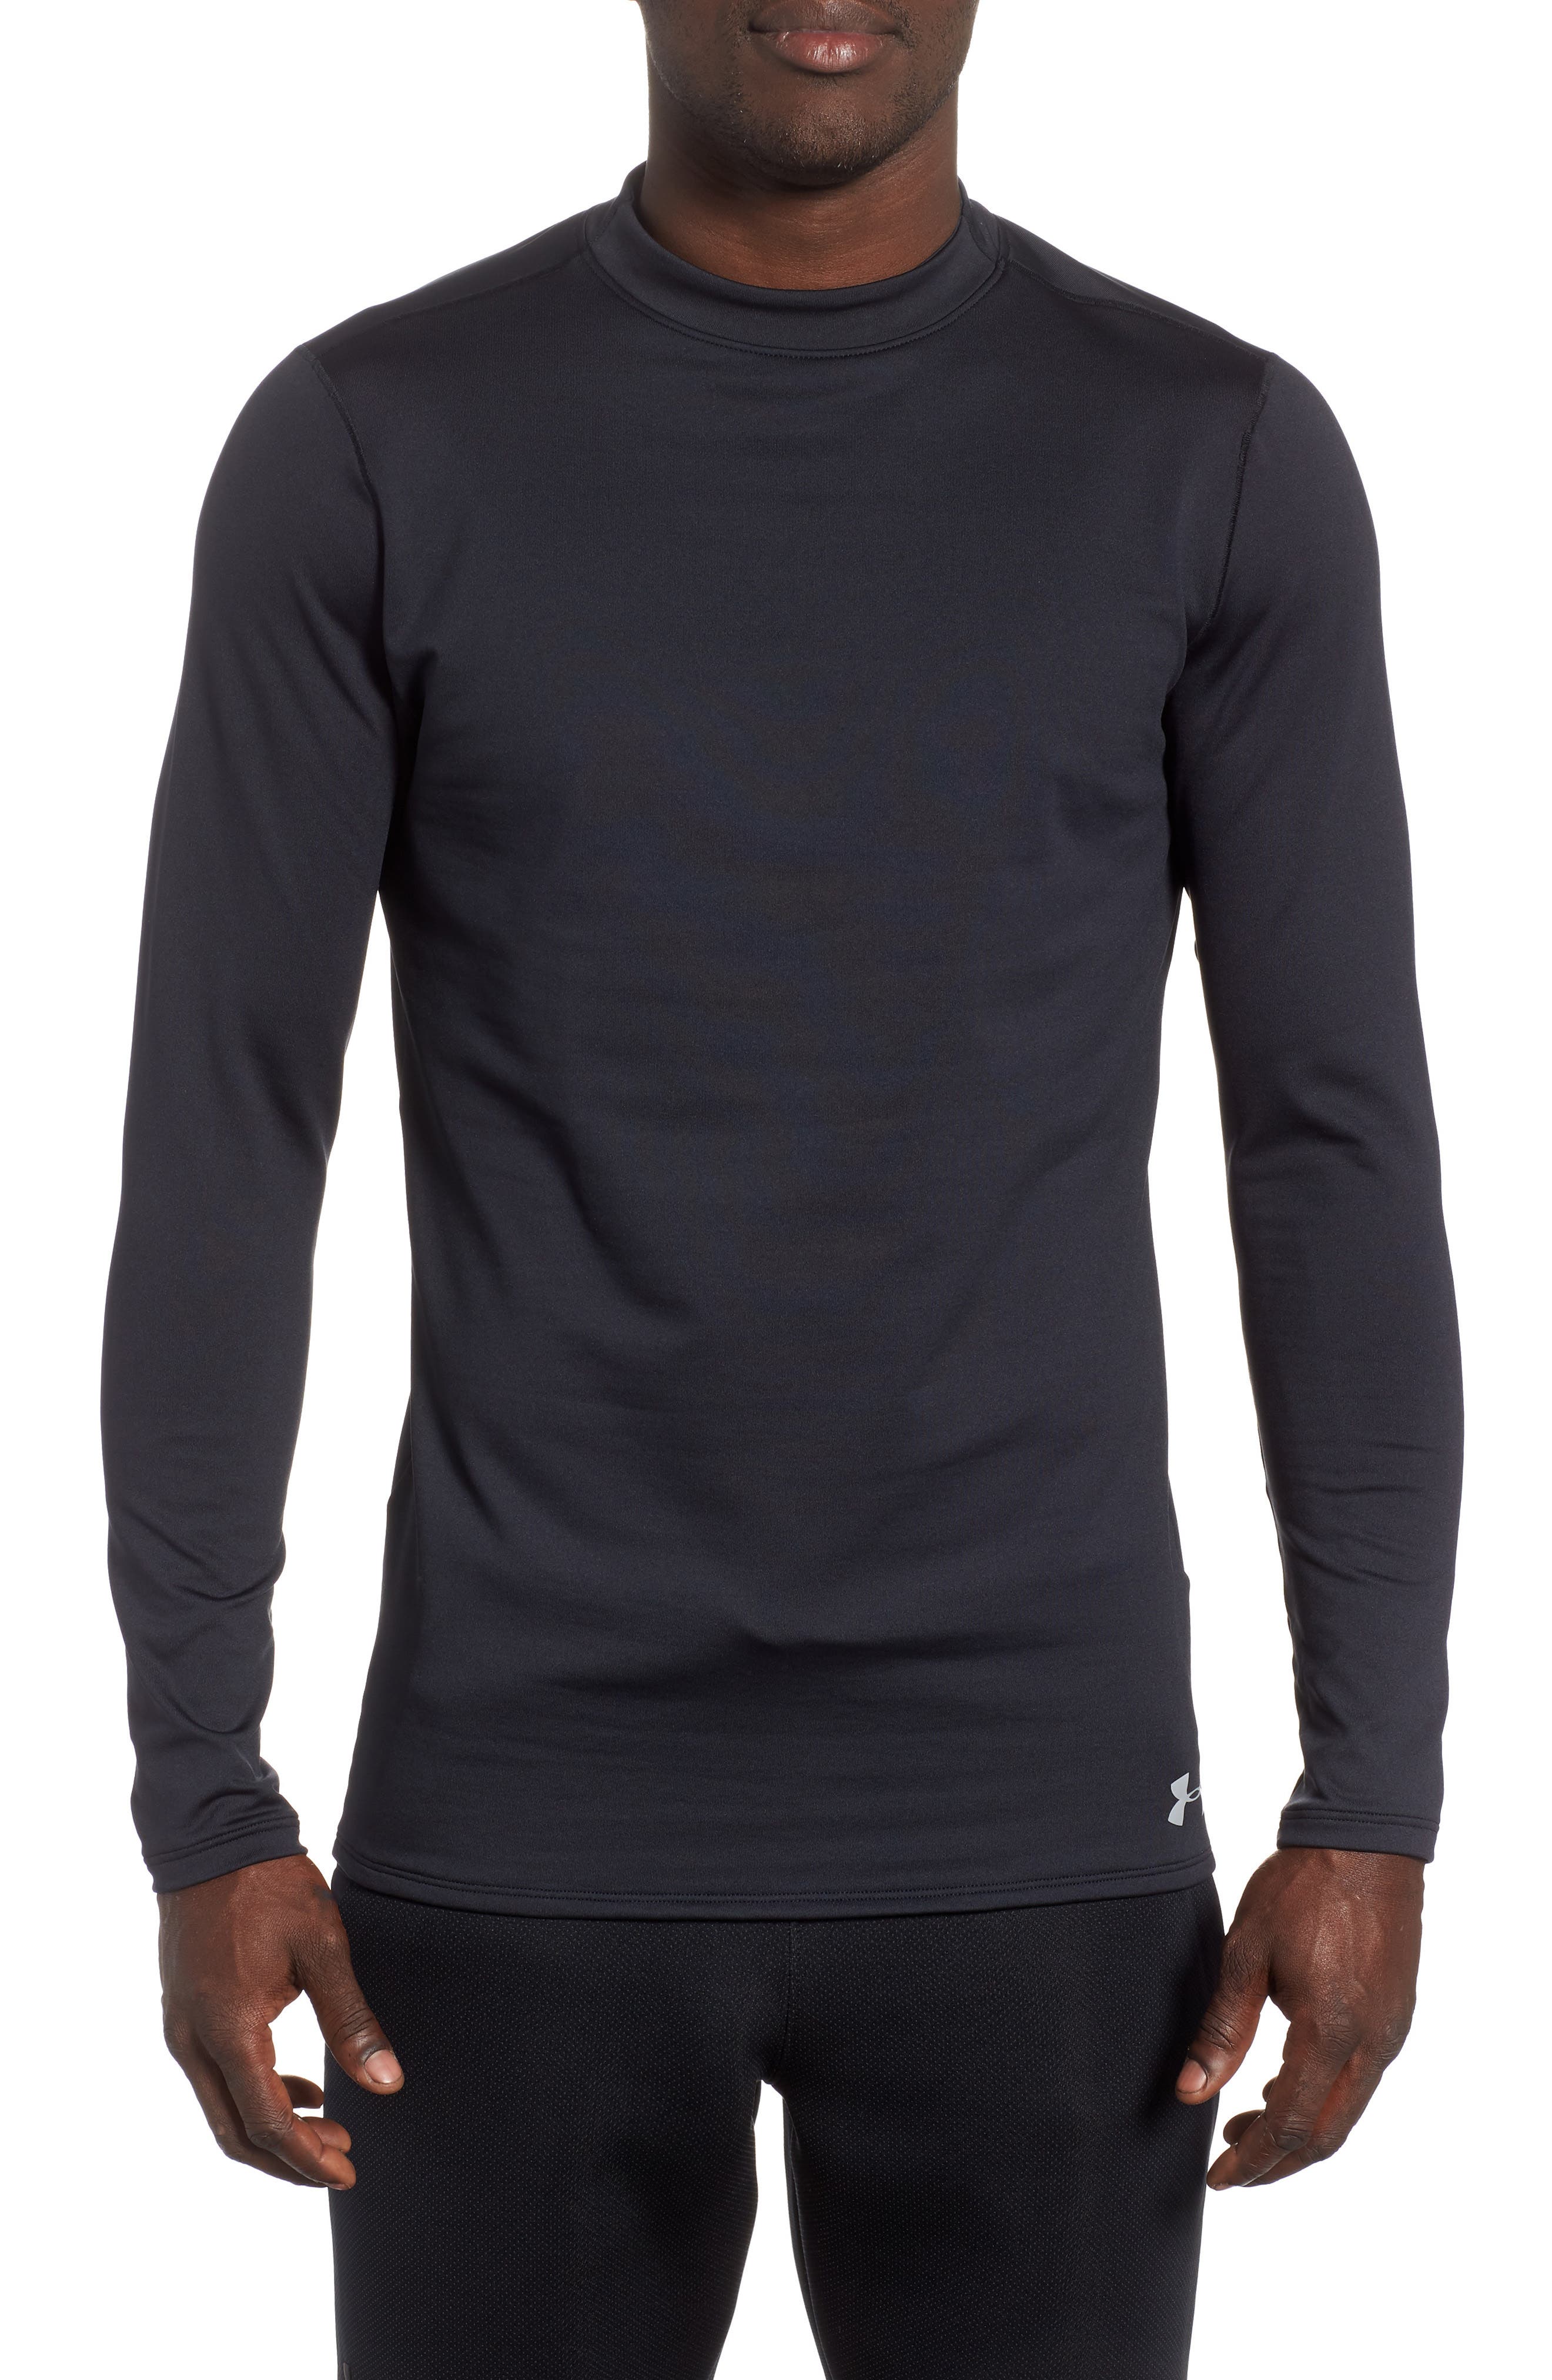 under armour coldgear thermal shirt